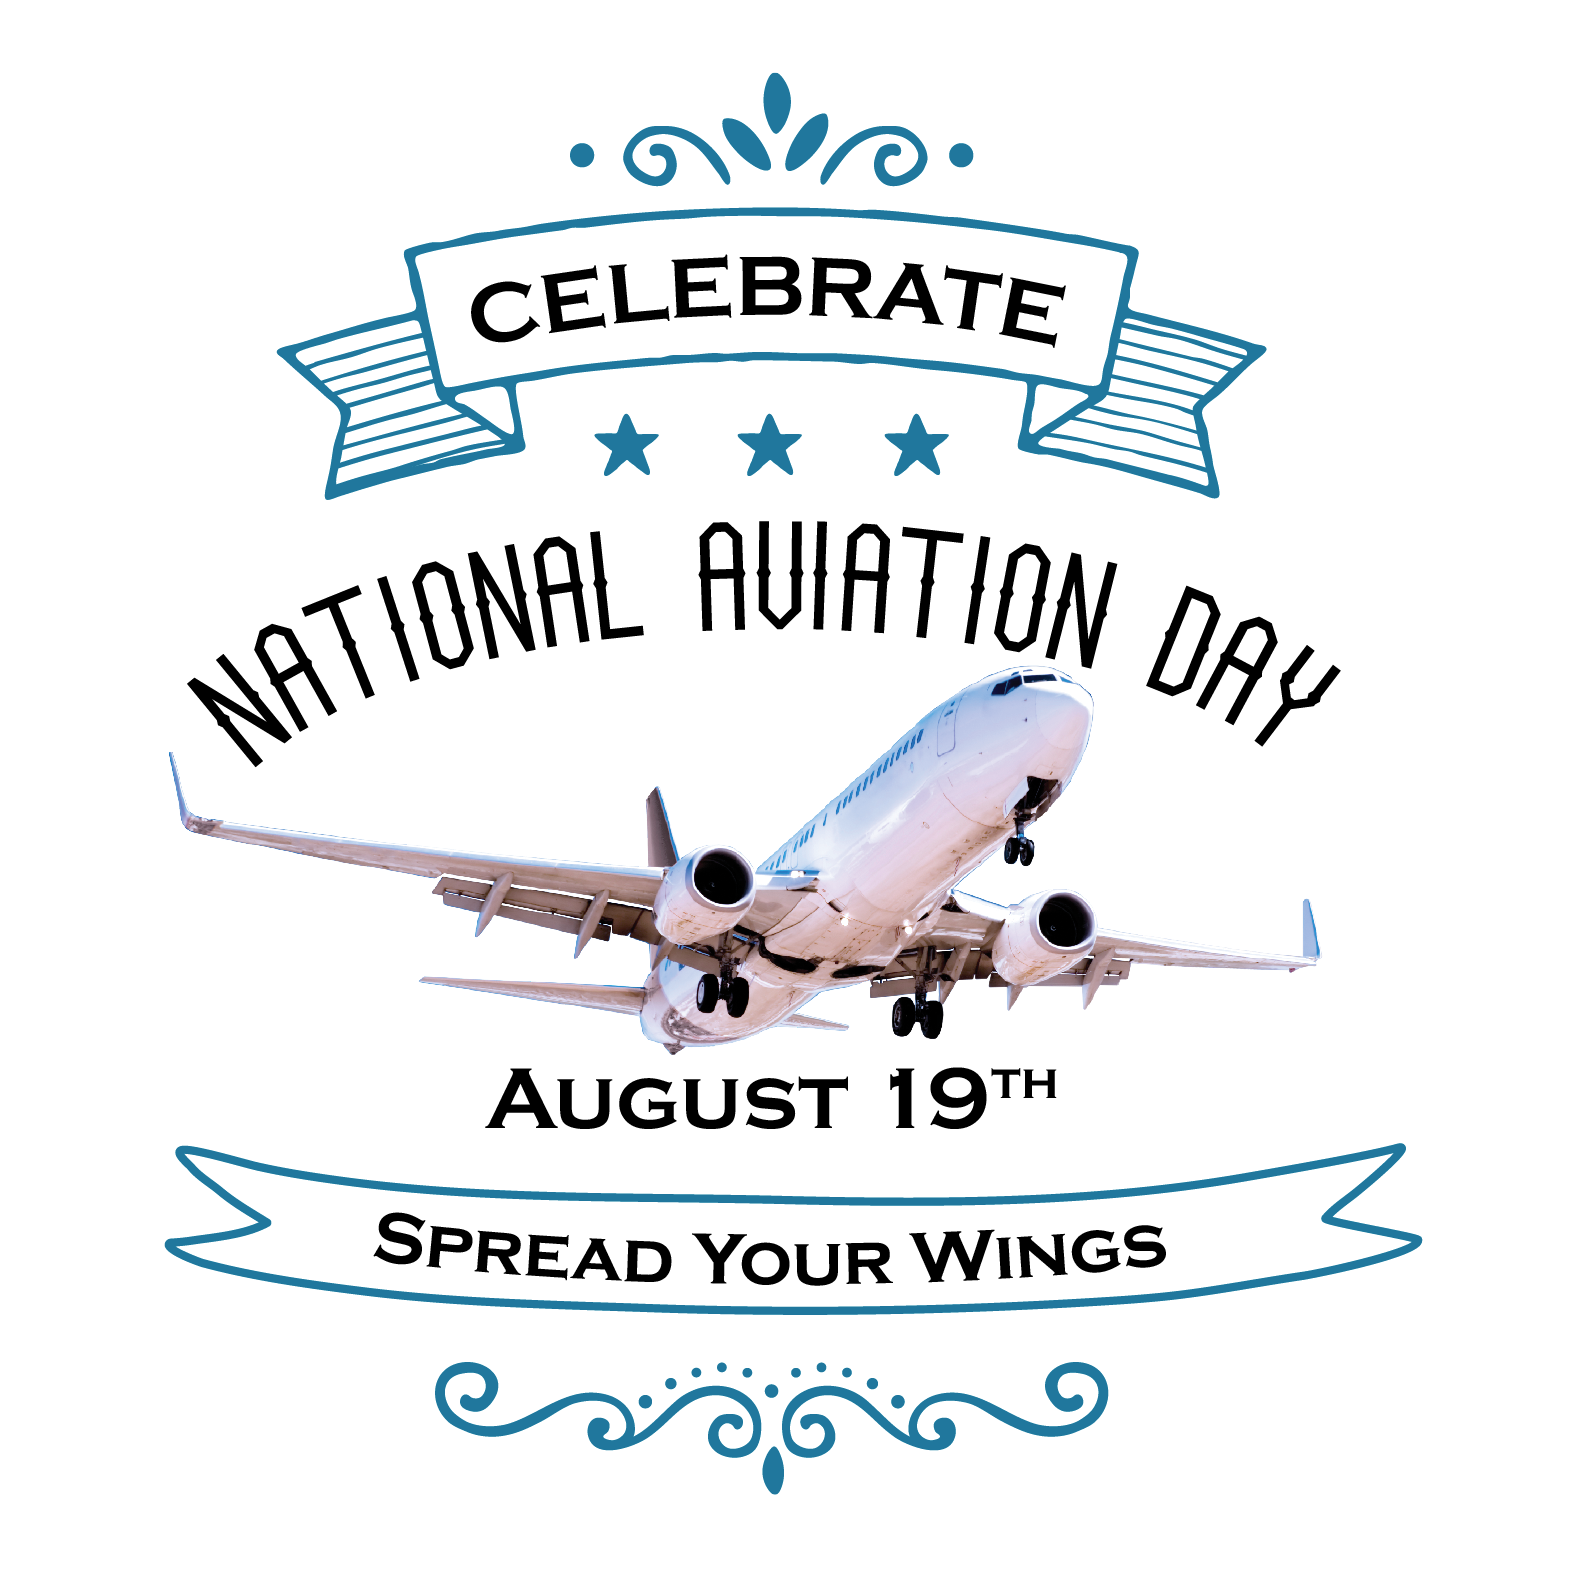 Celebrate National Aviation Day August 19th. Spread Your Wings.